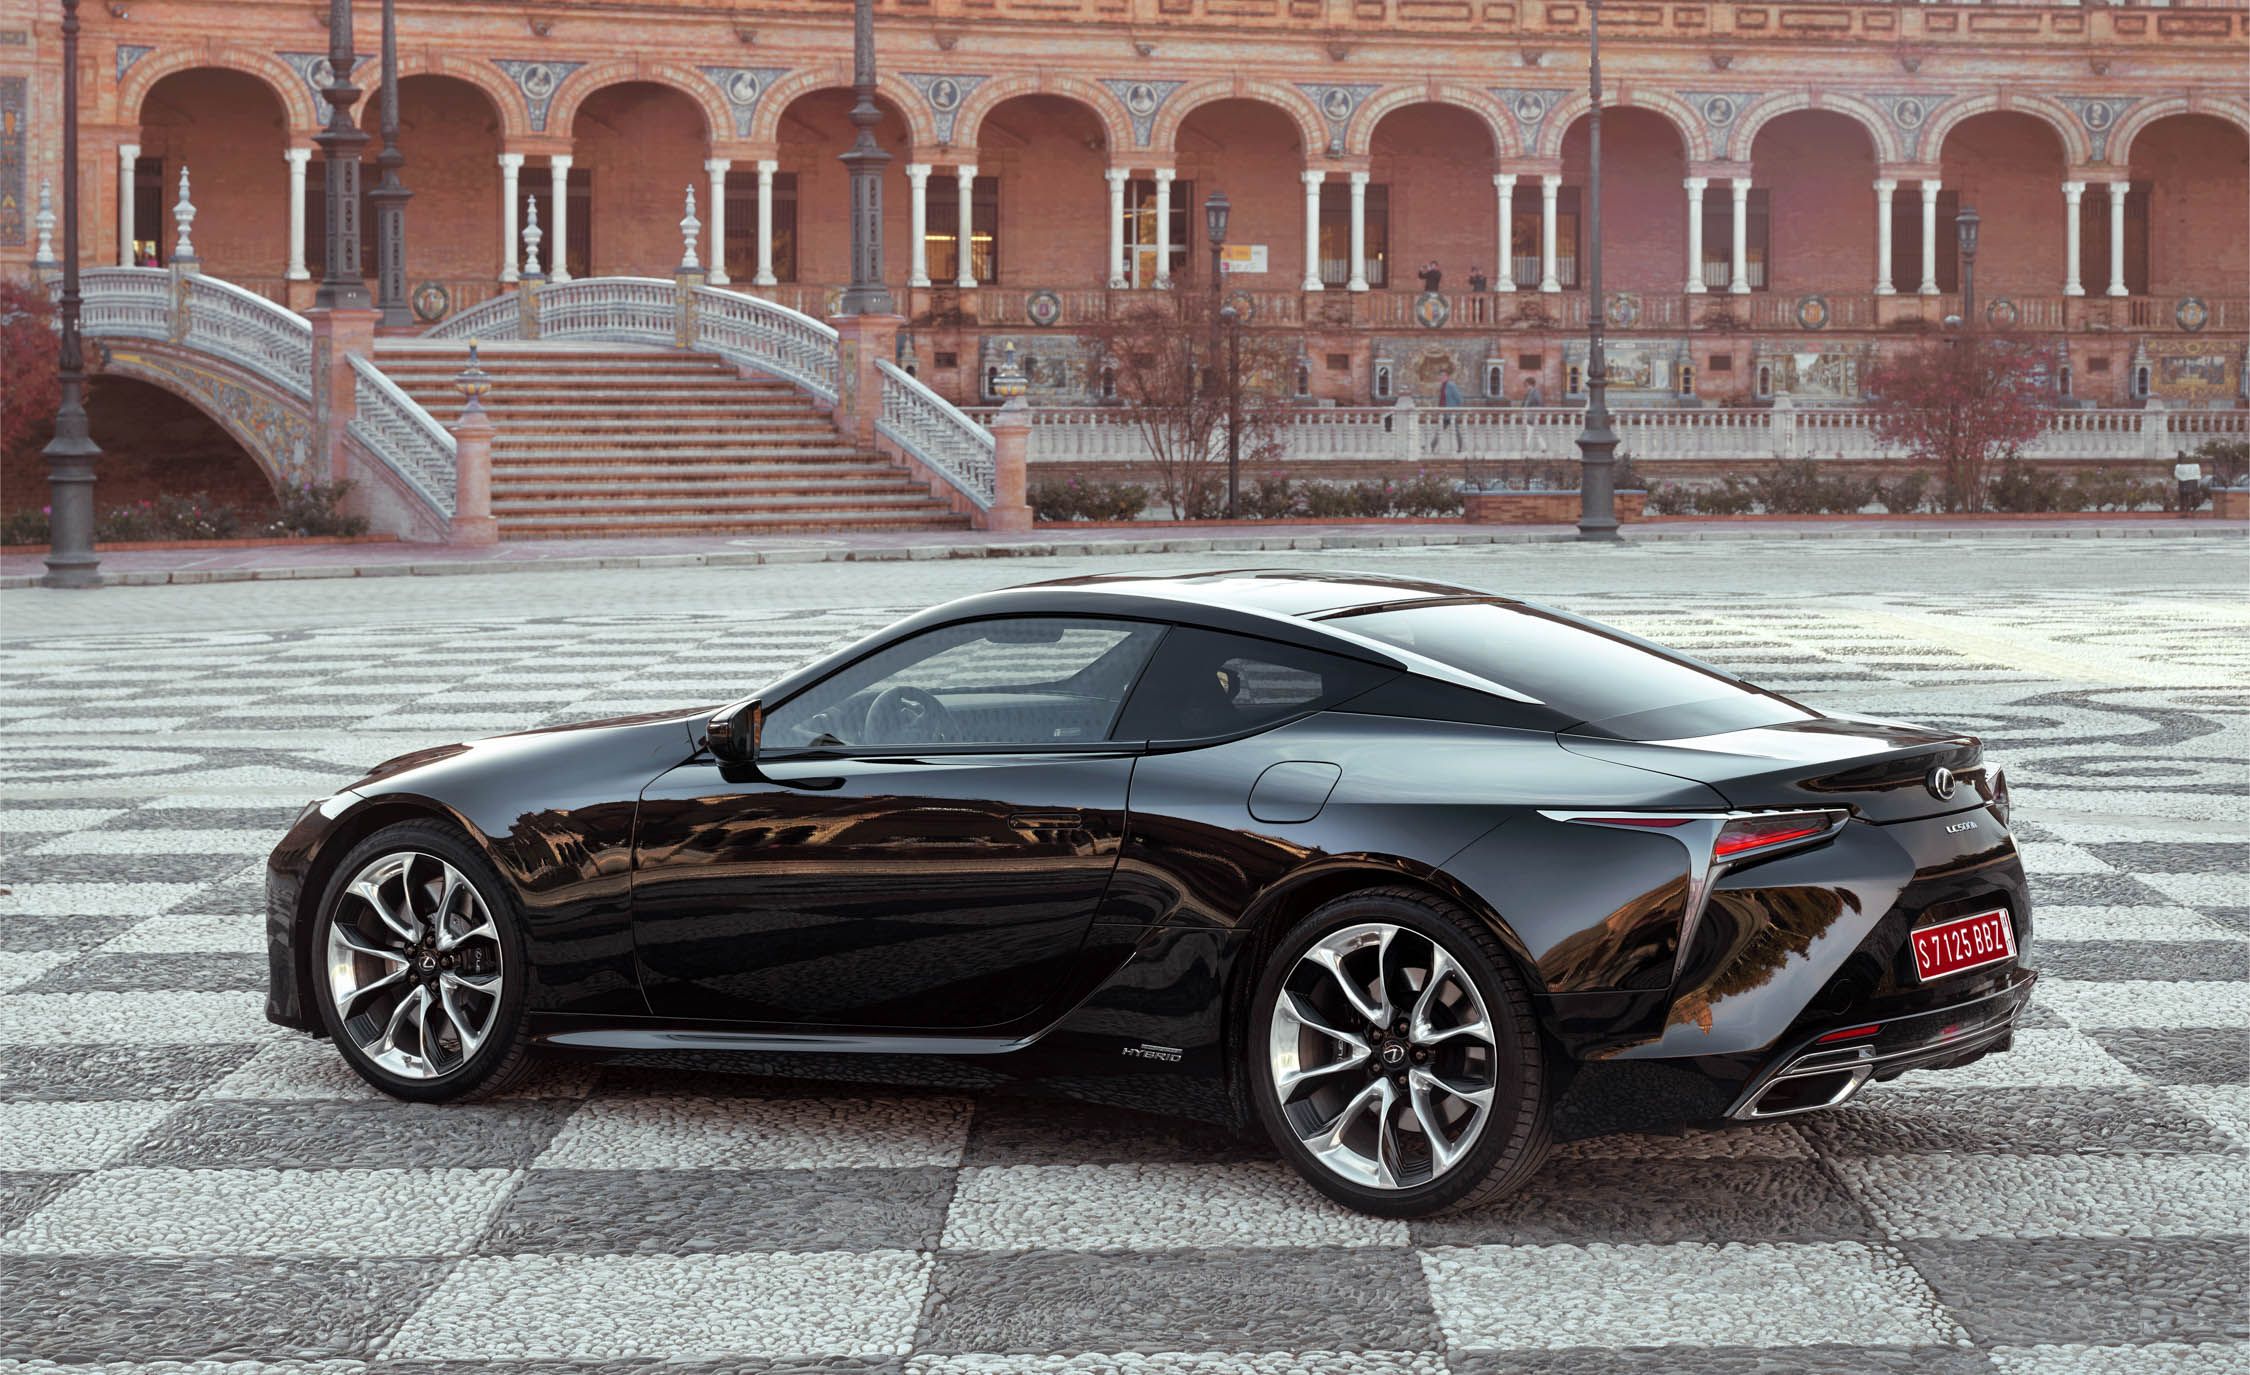 2018 Lexus Lc 500h Black Exterior Side And Rear (Gallery 55 of 84)